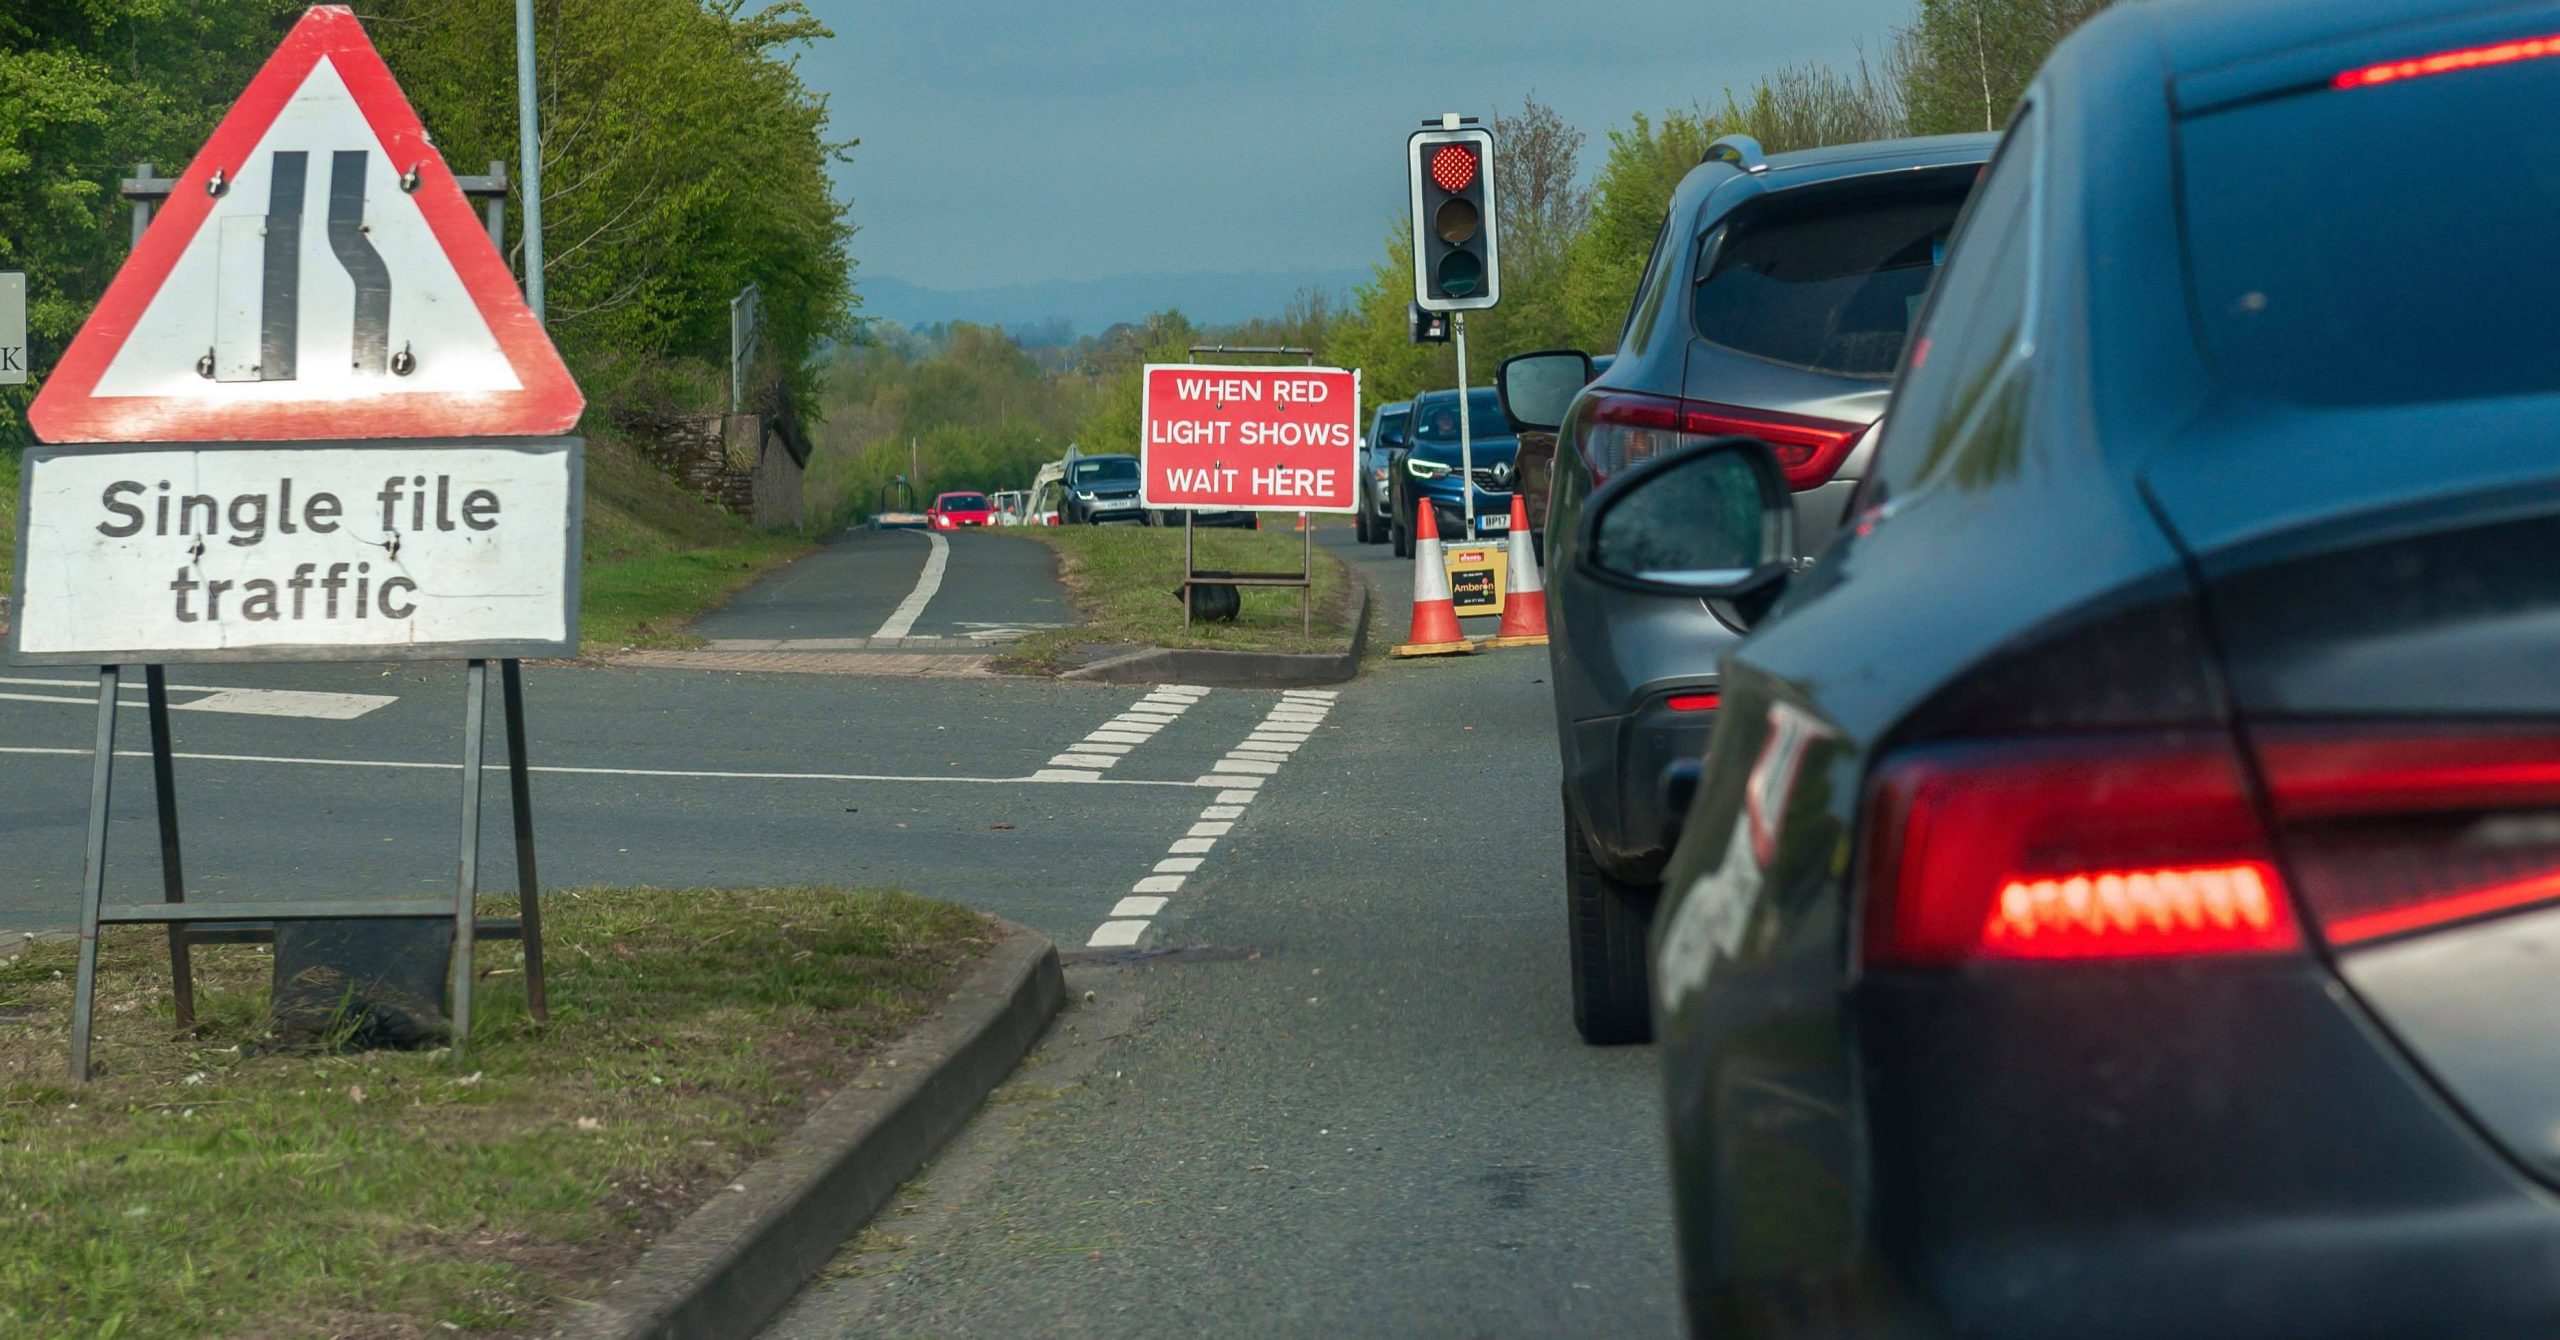 NEWS | Roadworks on major routes in Herefordshire delayed due to material delivery issues